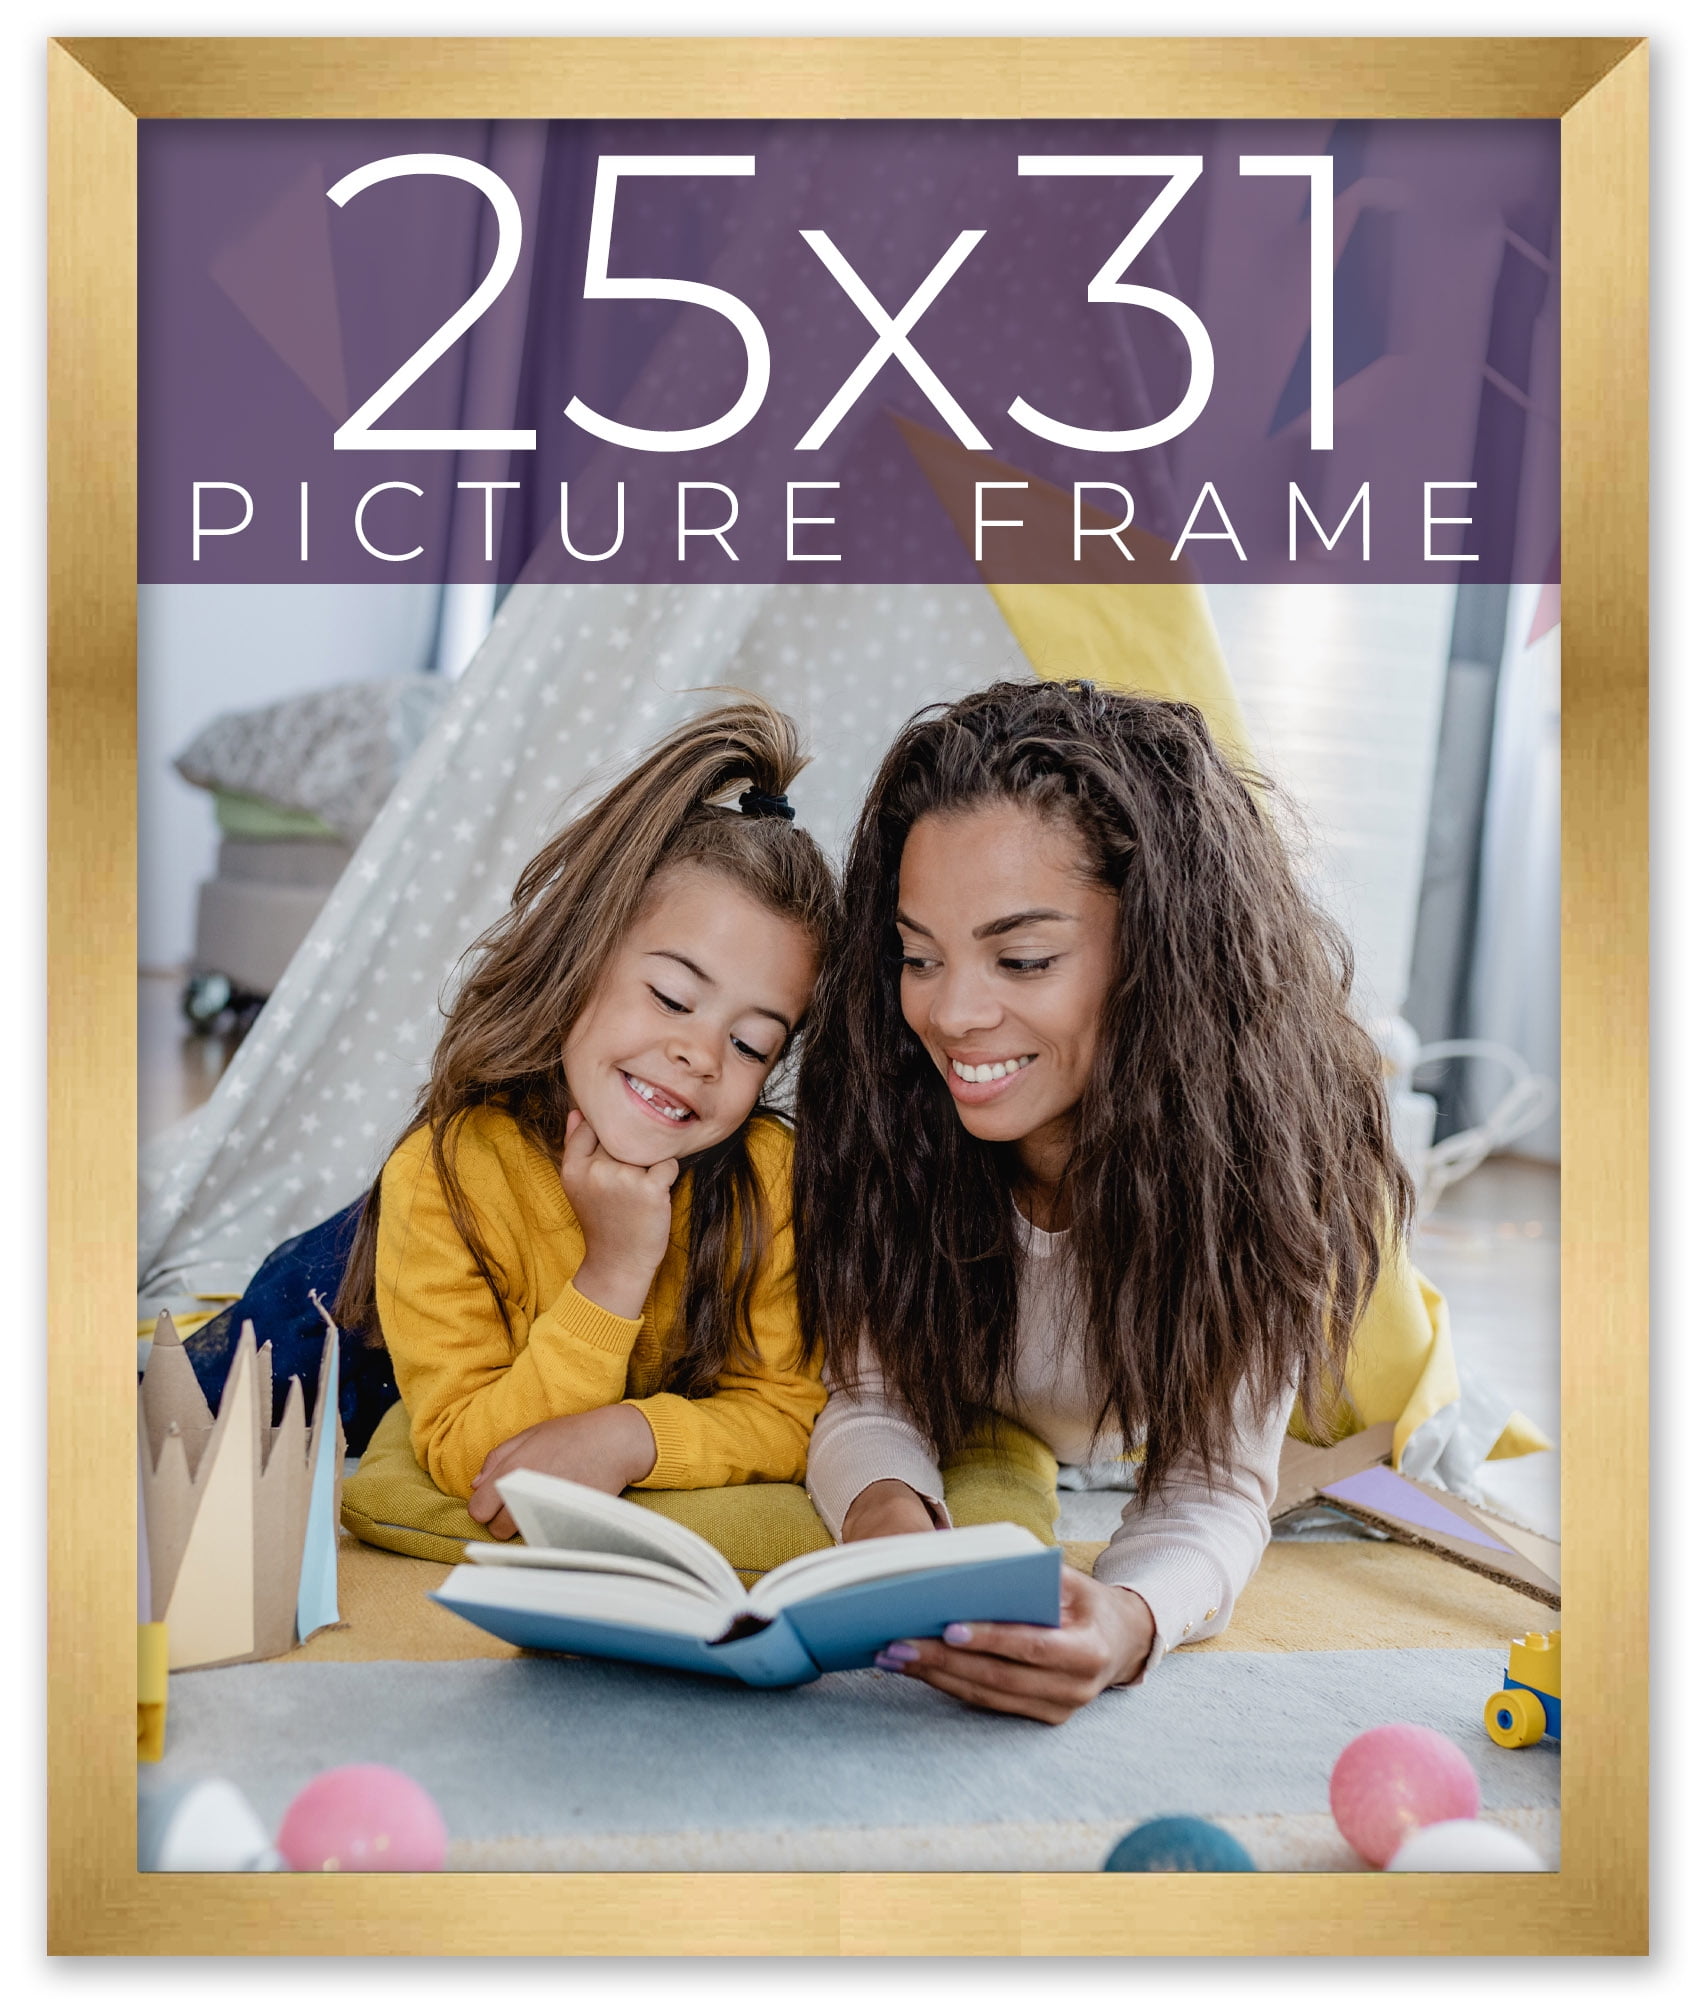 CustomPictureFrames.com 24x22 Frame Black Real Wood Picture Frame Width 1.5 Inches | Interior Frame Depth 0.5 Inches | Sonoma Gold Distressed Photo